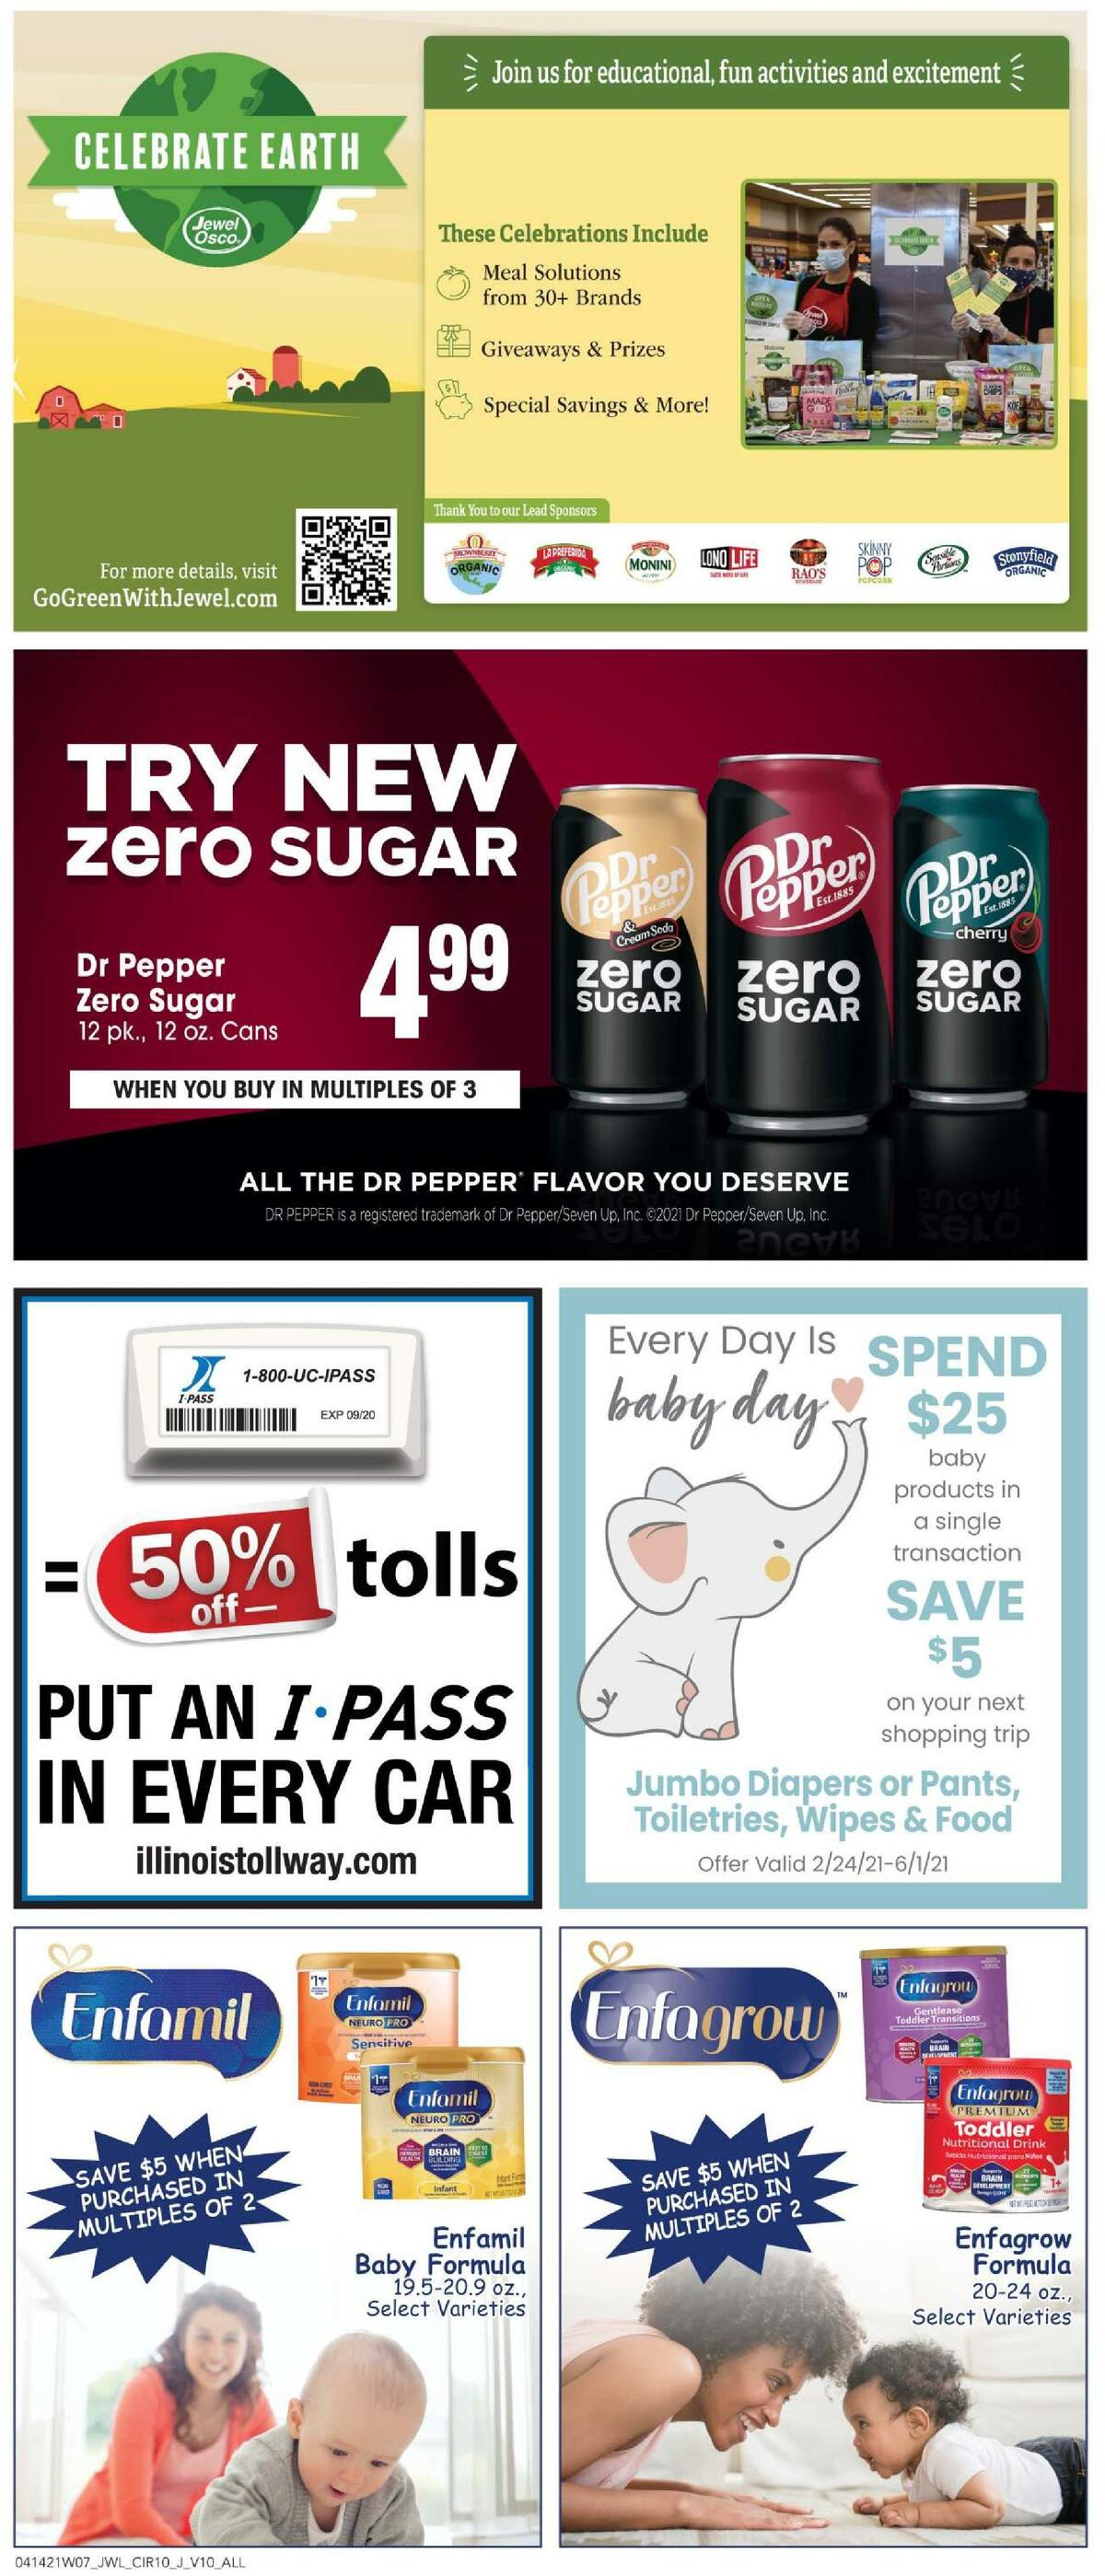 Jewel Osco Weekly Ad from April 14